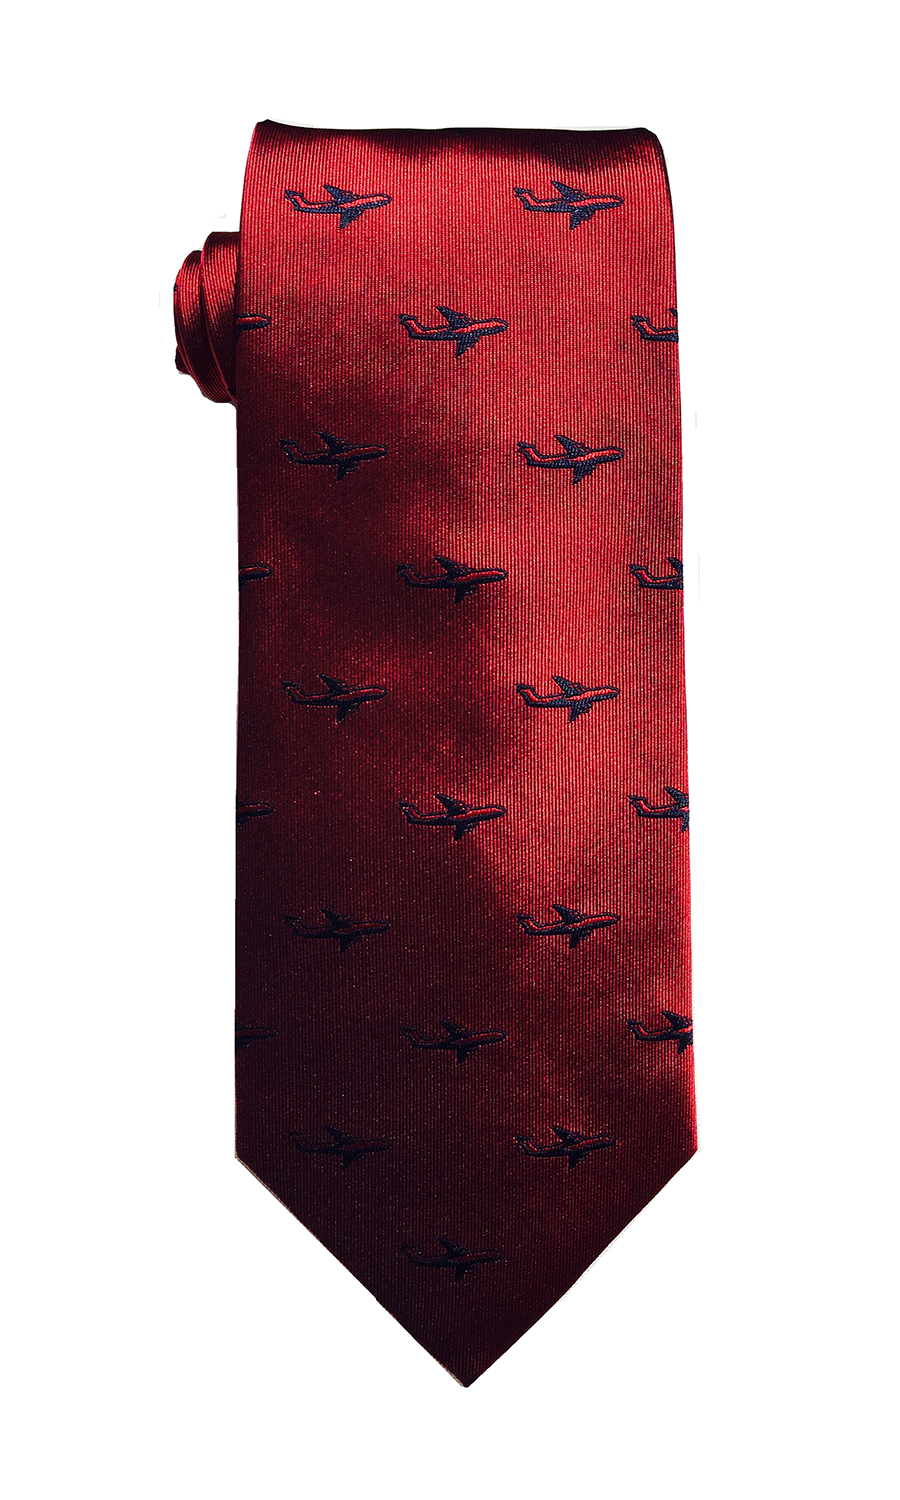 C-5 Galaxy airlifter tie in red